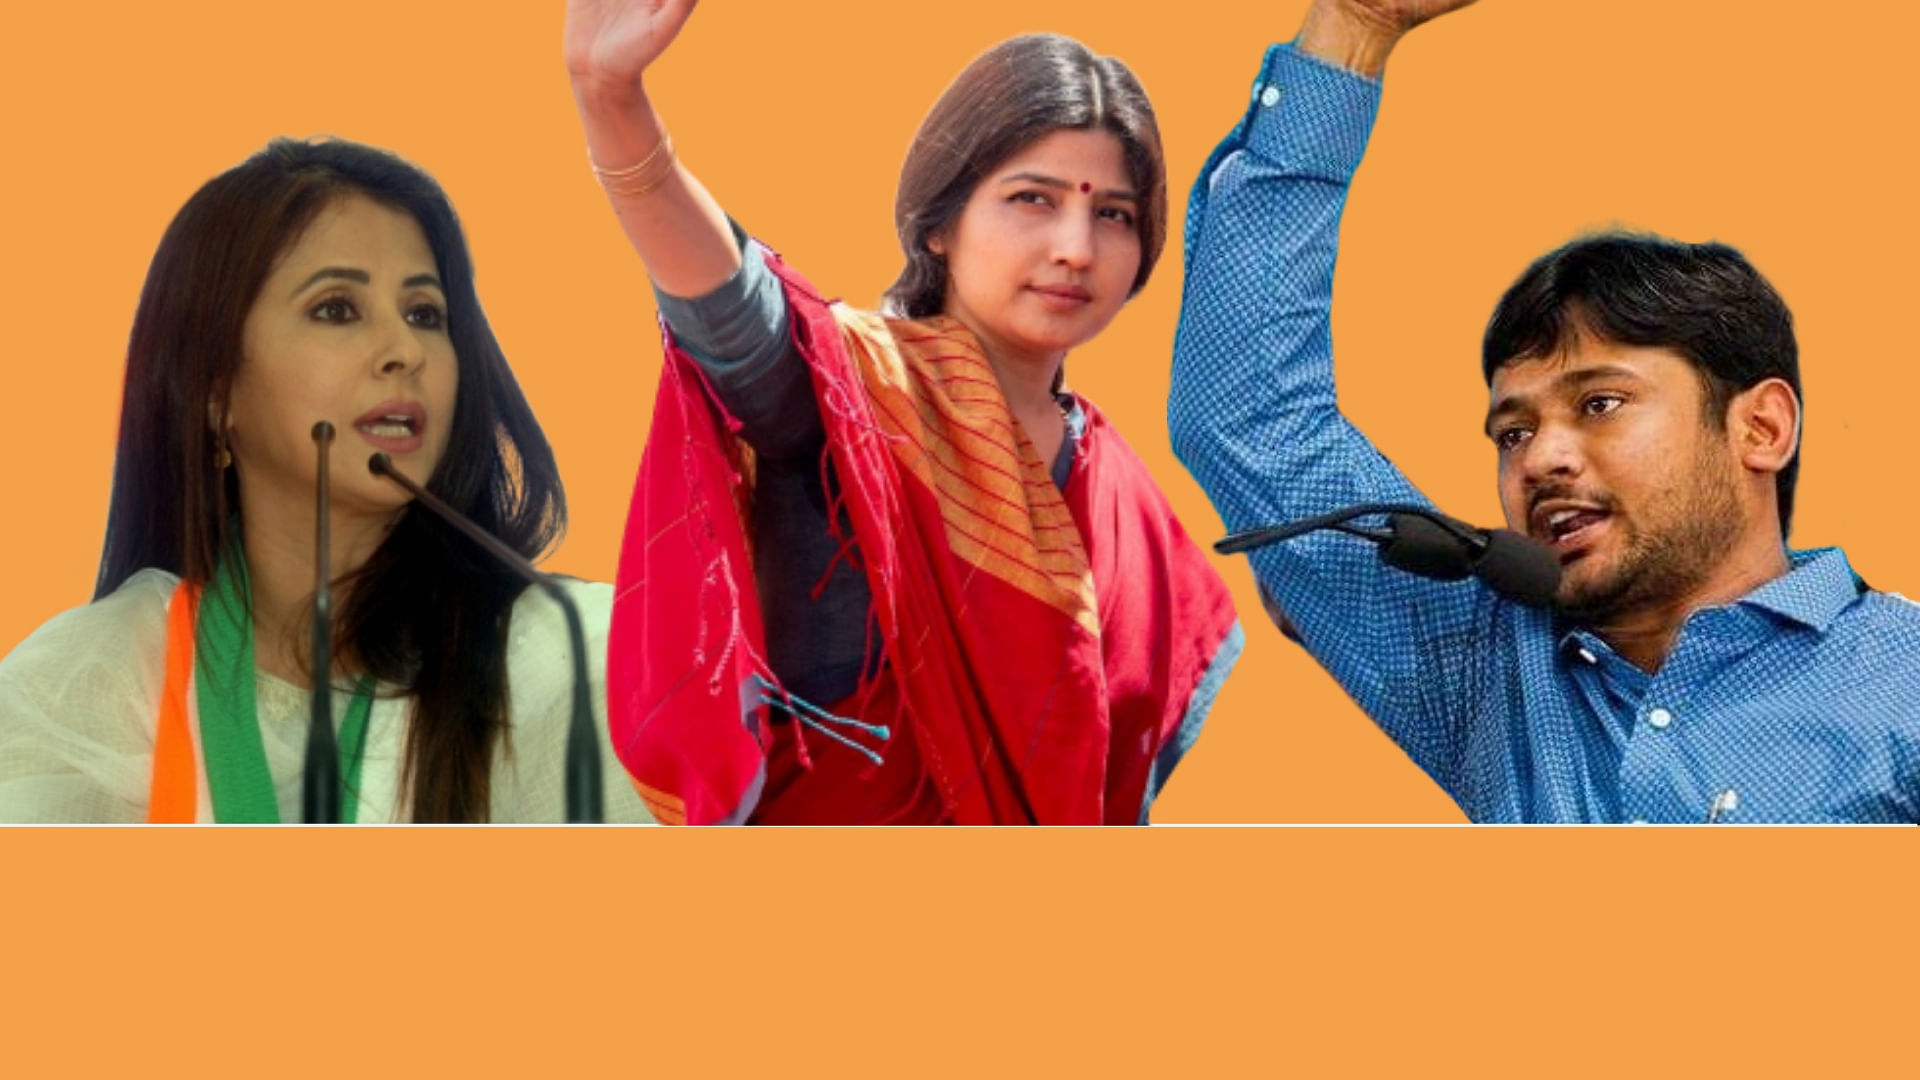 Some of the key candidates fighting it out in this phase of the polls are Dimple Yadav, Priya Dutt, Urmila Matondkar, Moon Moon Sen, Kanhaiya Kumar, among others. 